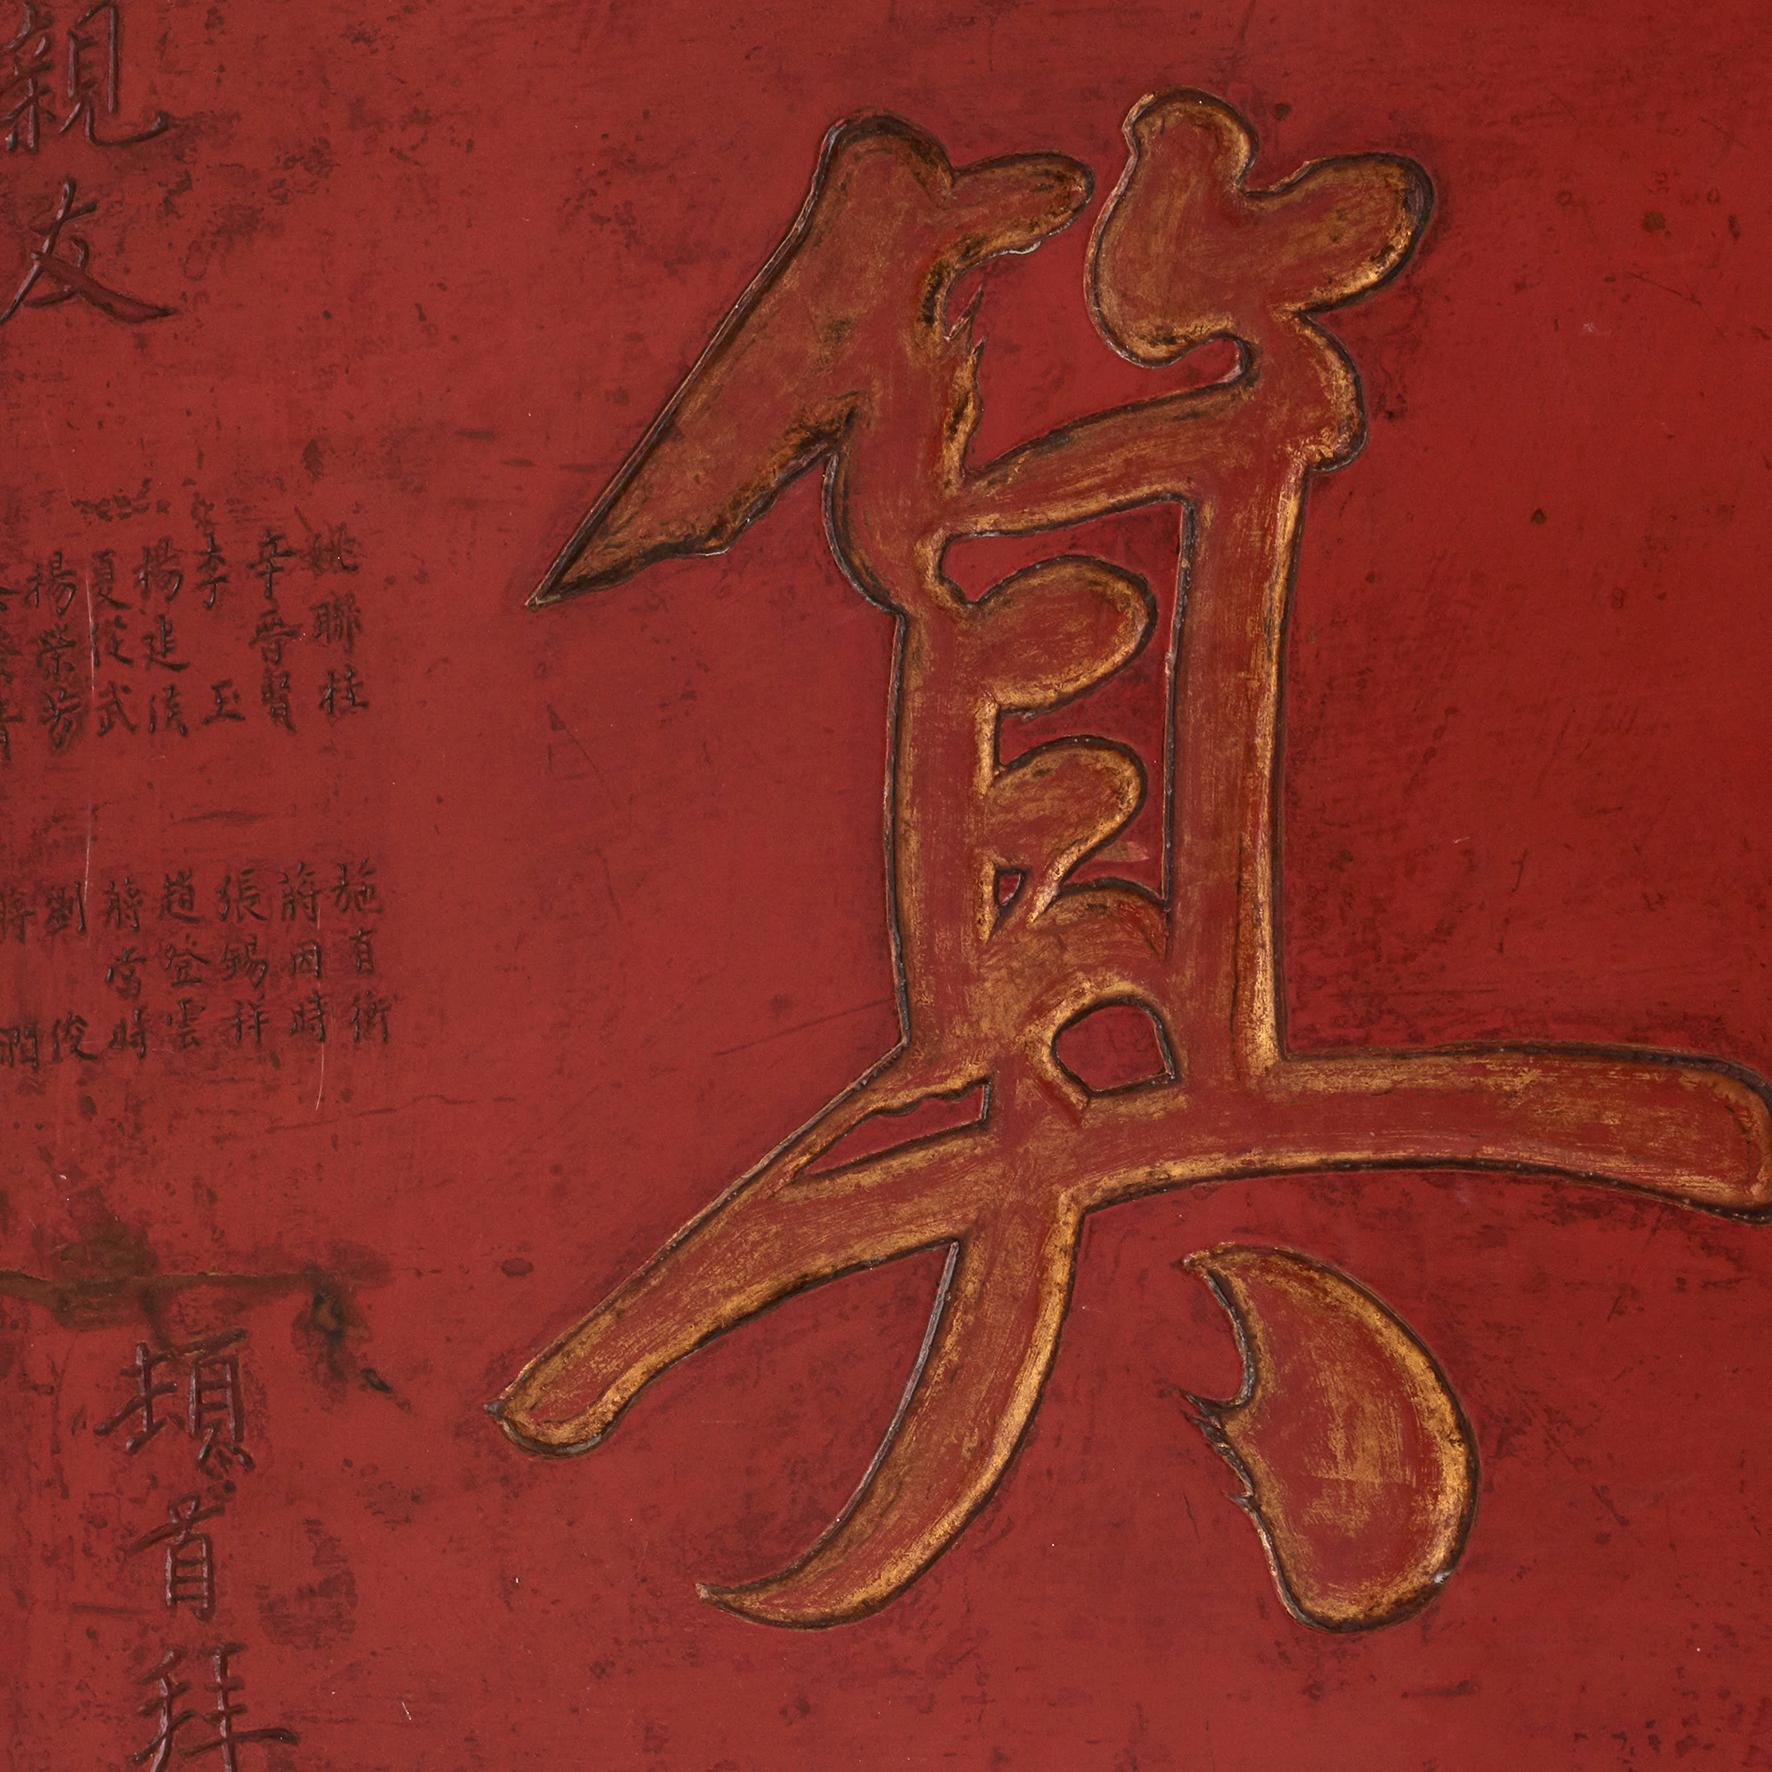 Metal Mid-19th Century Chinese Calligraphy Sign Board For Sale